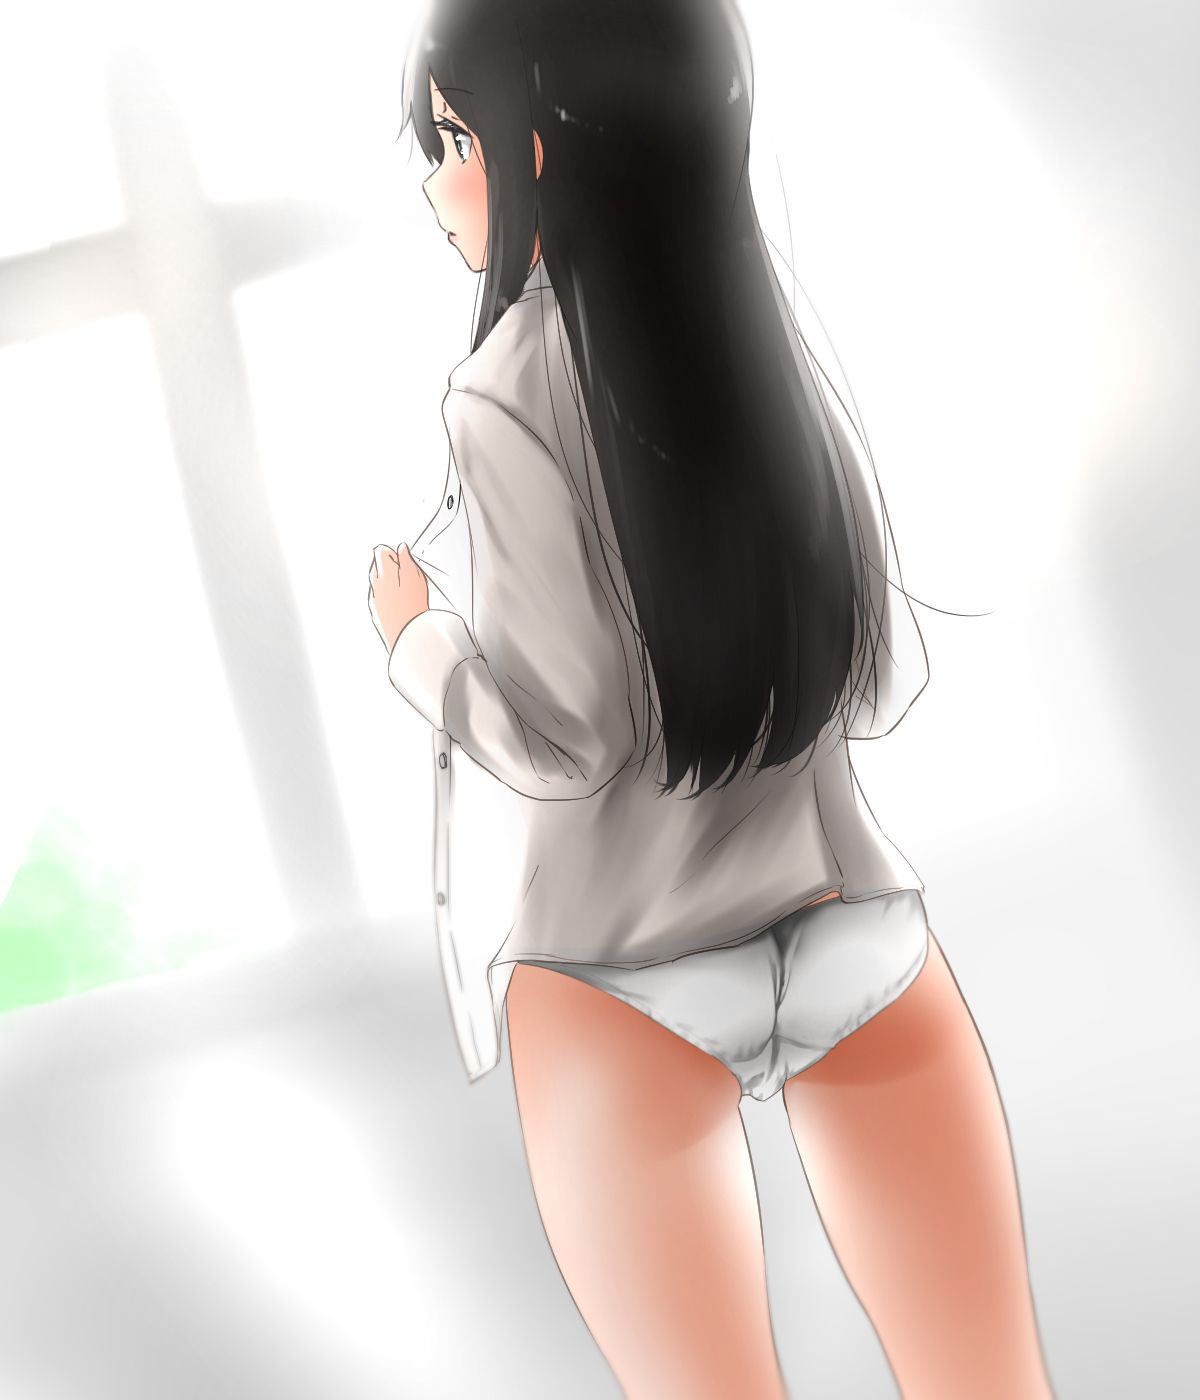 Erotic anime summary Erotic image collection of beautiful girls and beautiful girls with full pants because there is no skirt [50 pieces] 19